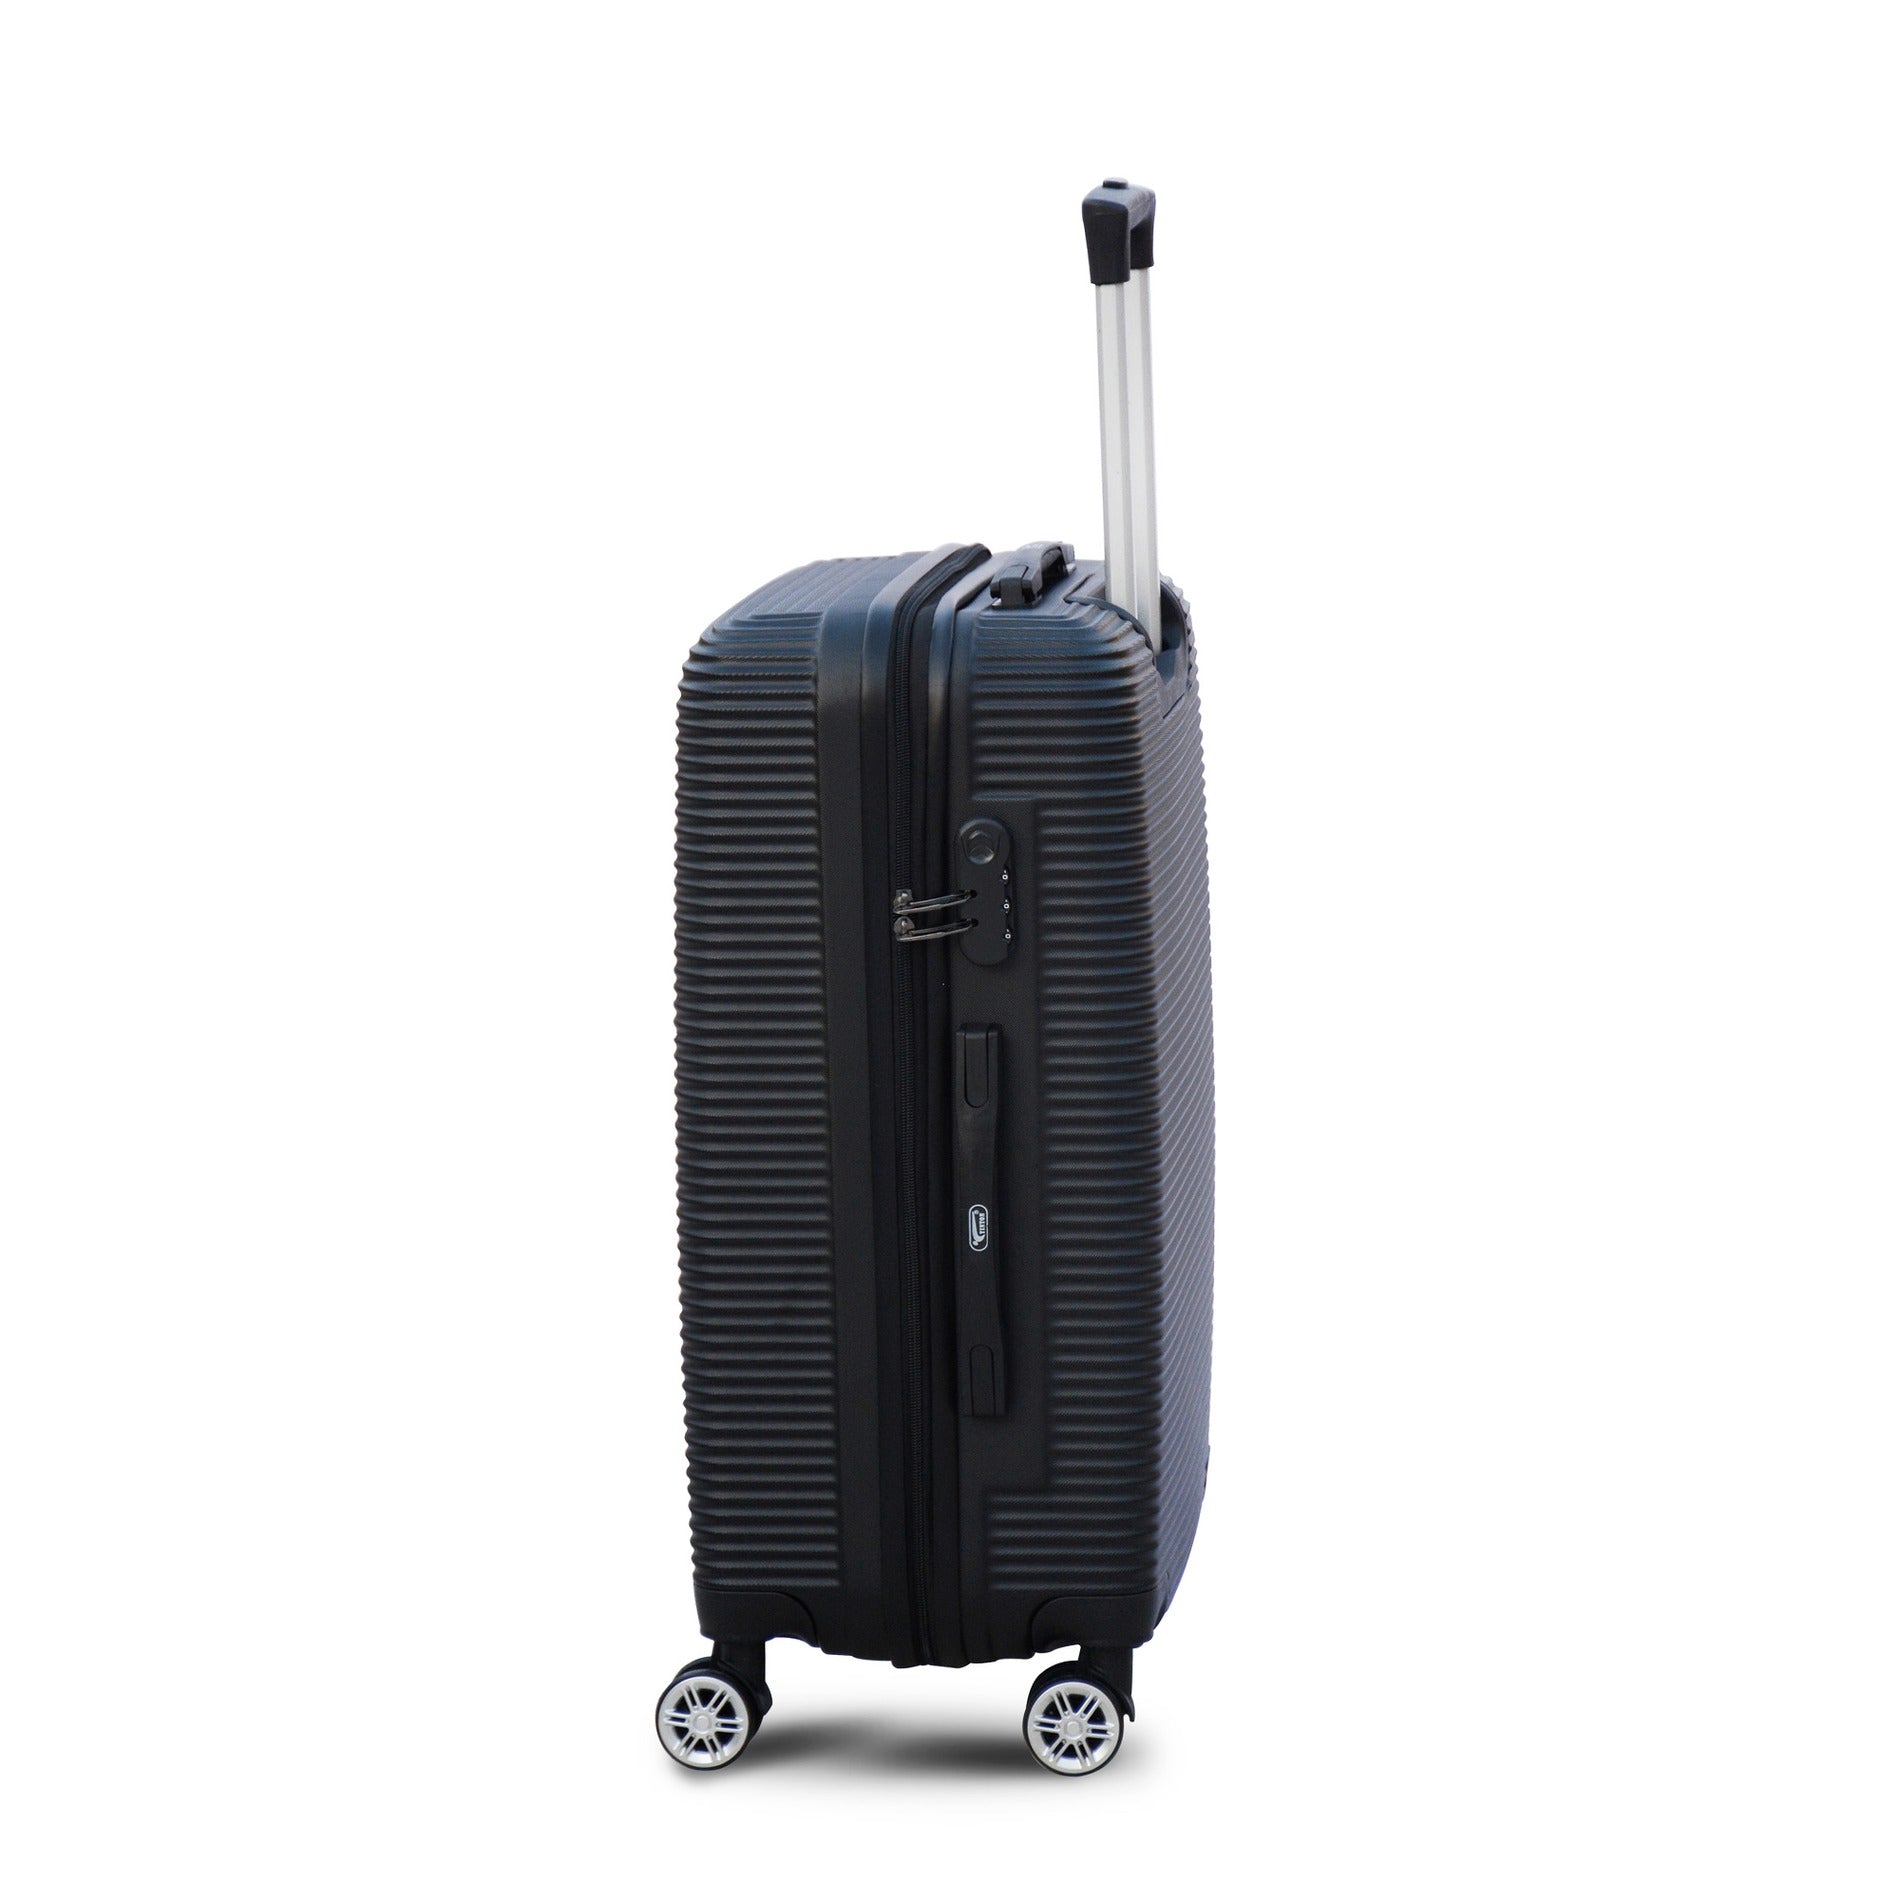 24" Black Colour JIAN ABS Line Luggage Lightweight Hard Case Trolley Bag With Spinner Wheel Zaappy.com